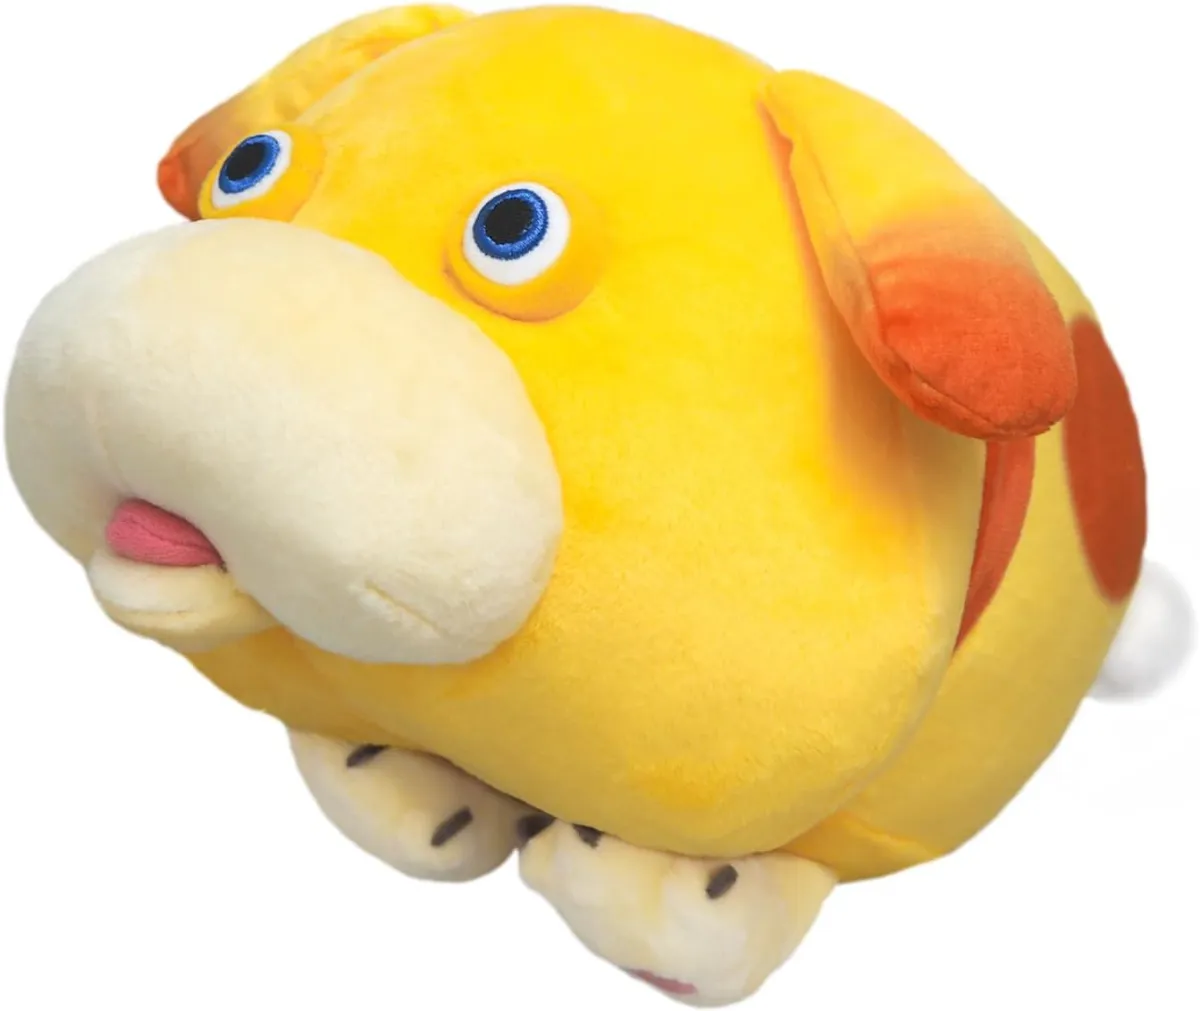 Pikmin 4 Oatchi and Ice Pikmin Plush Arrive in September